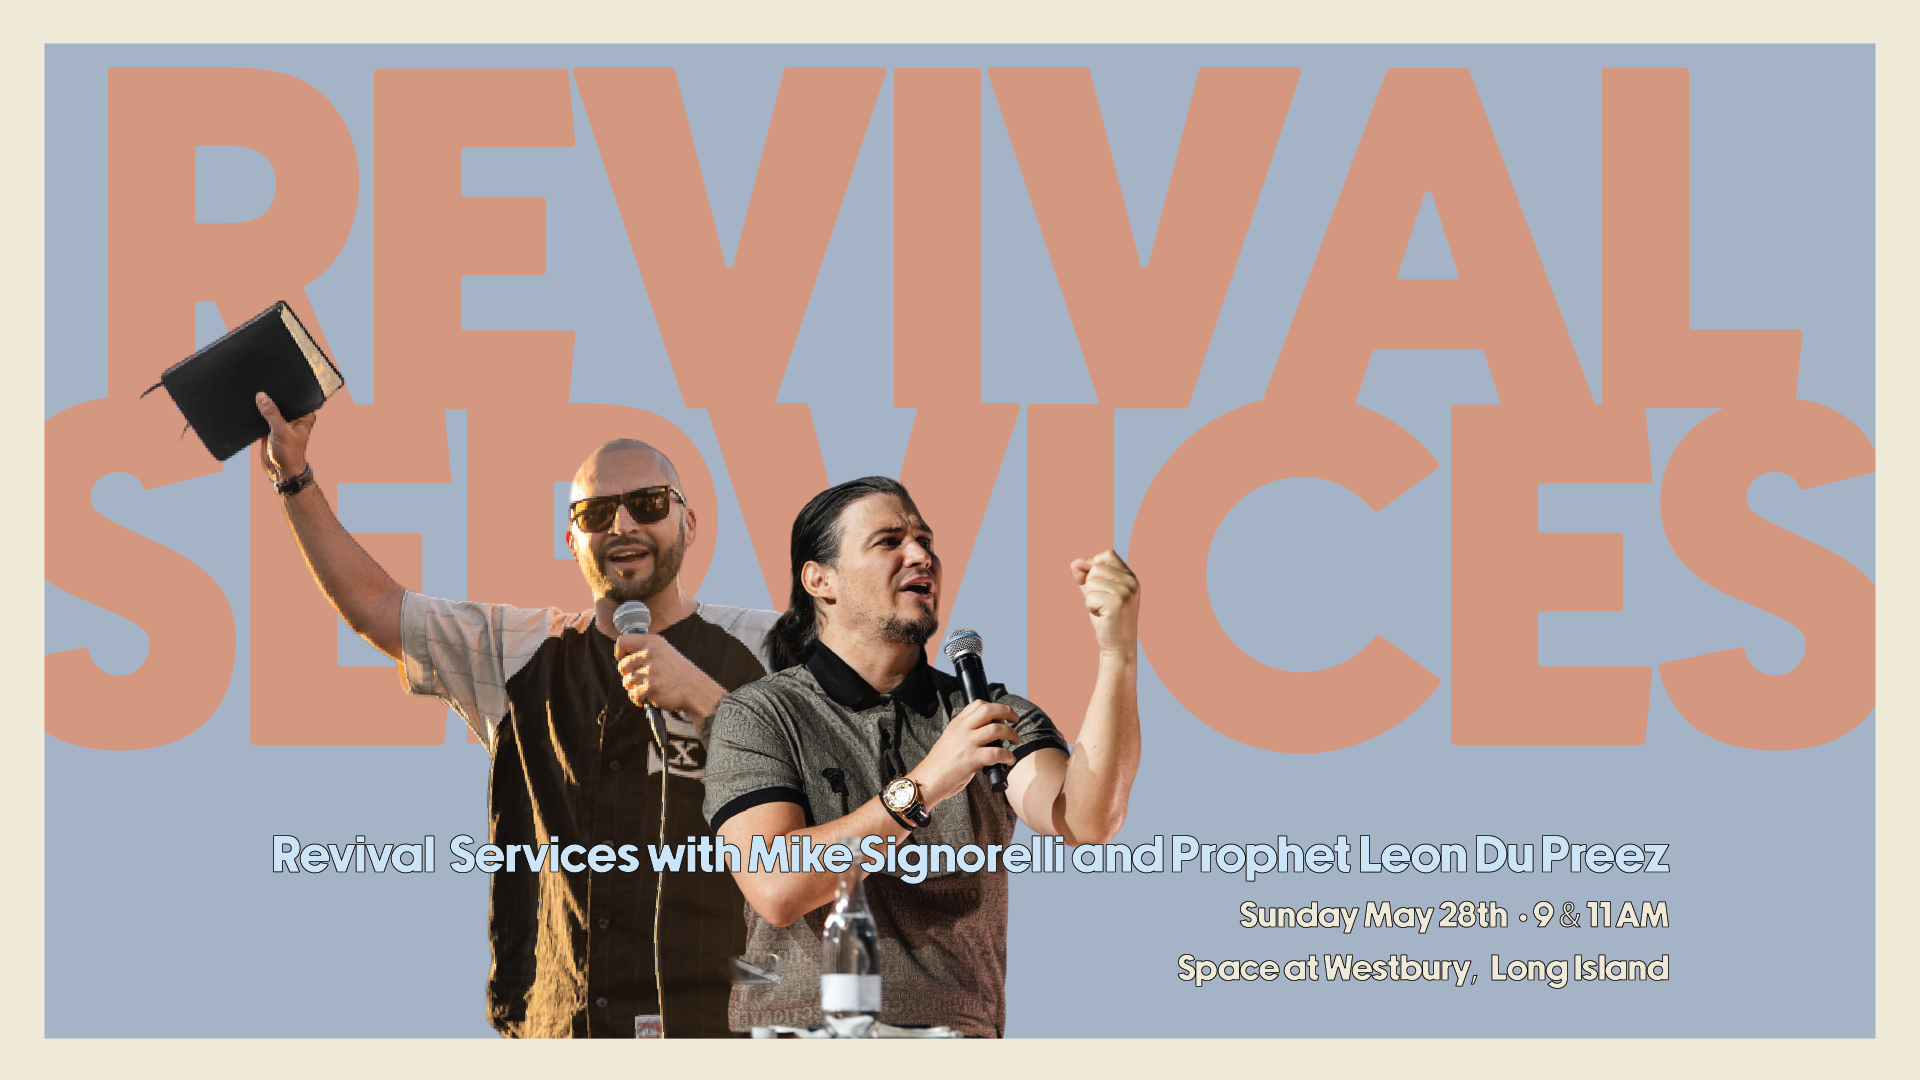 Revival services with prophet leon dupreez and pastor Mike signorelli